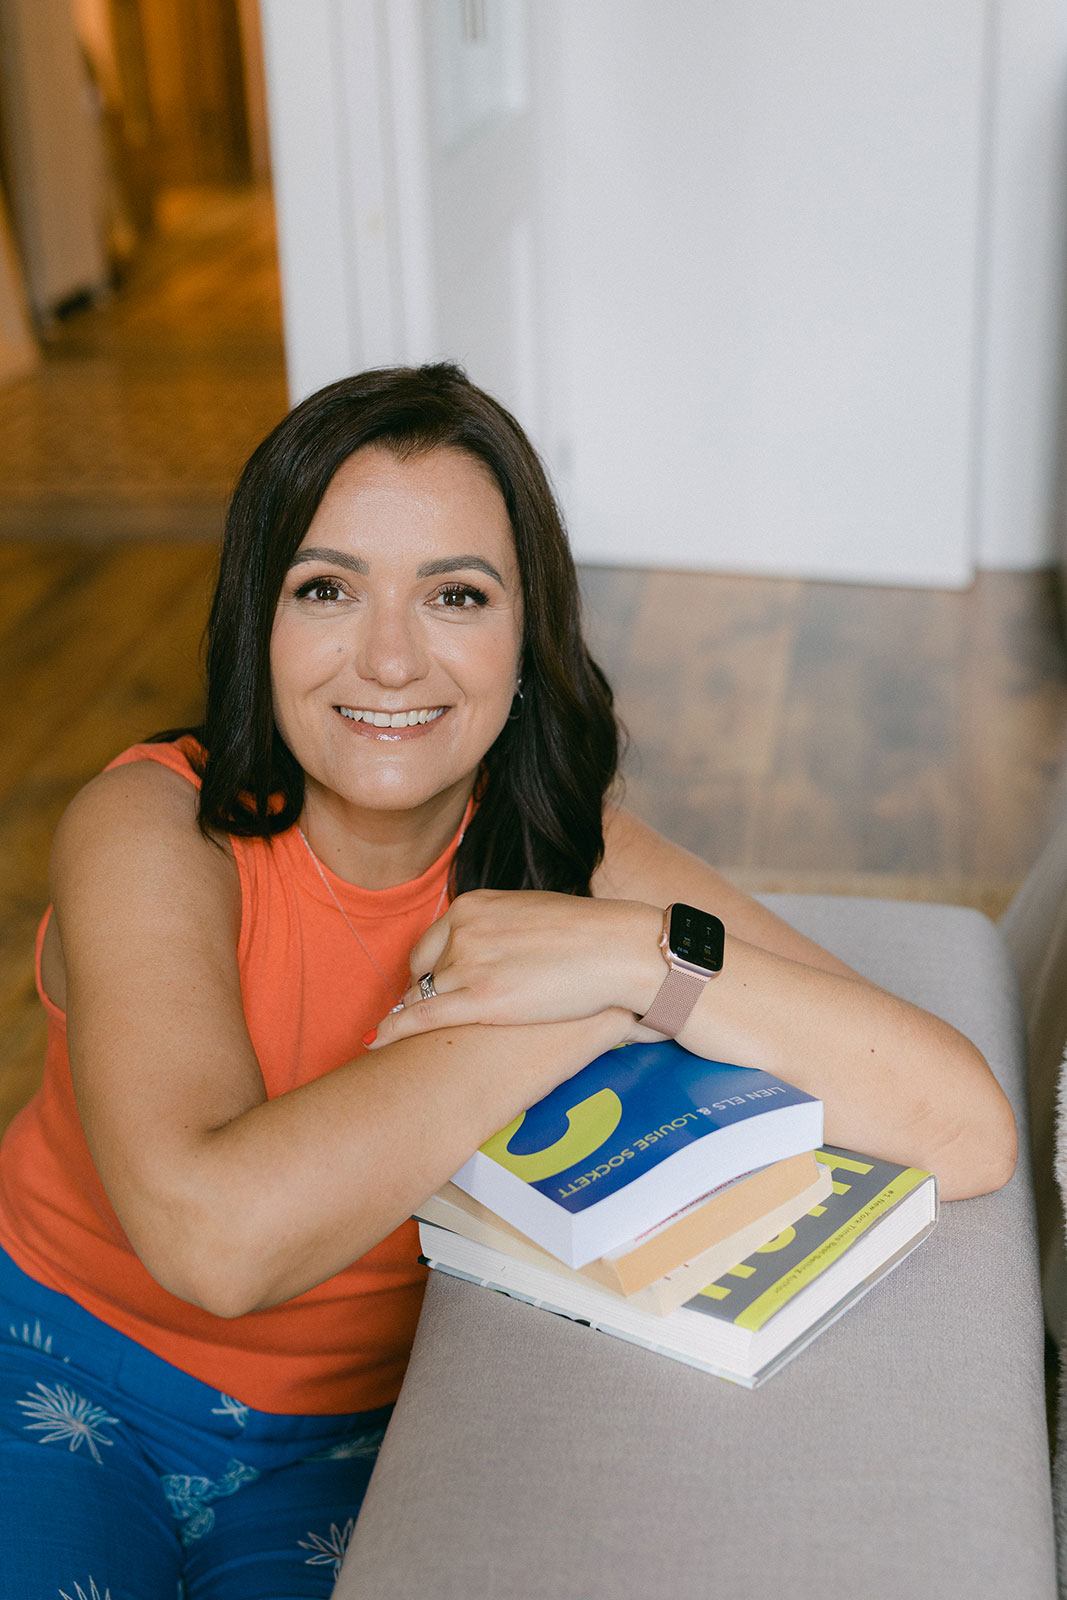 Smiling woman with books in her hands working a business coach